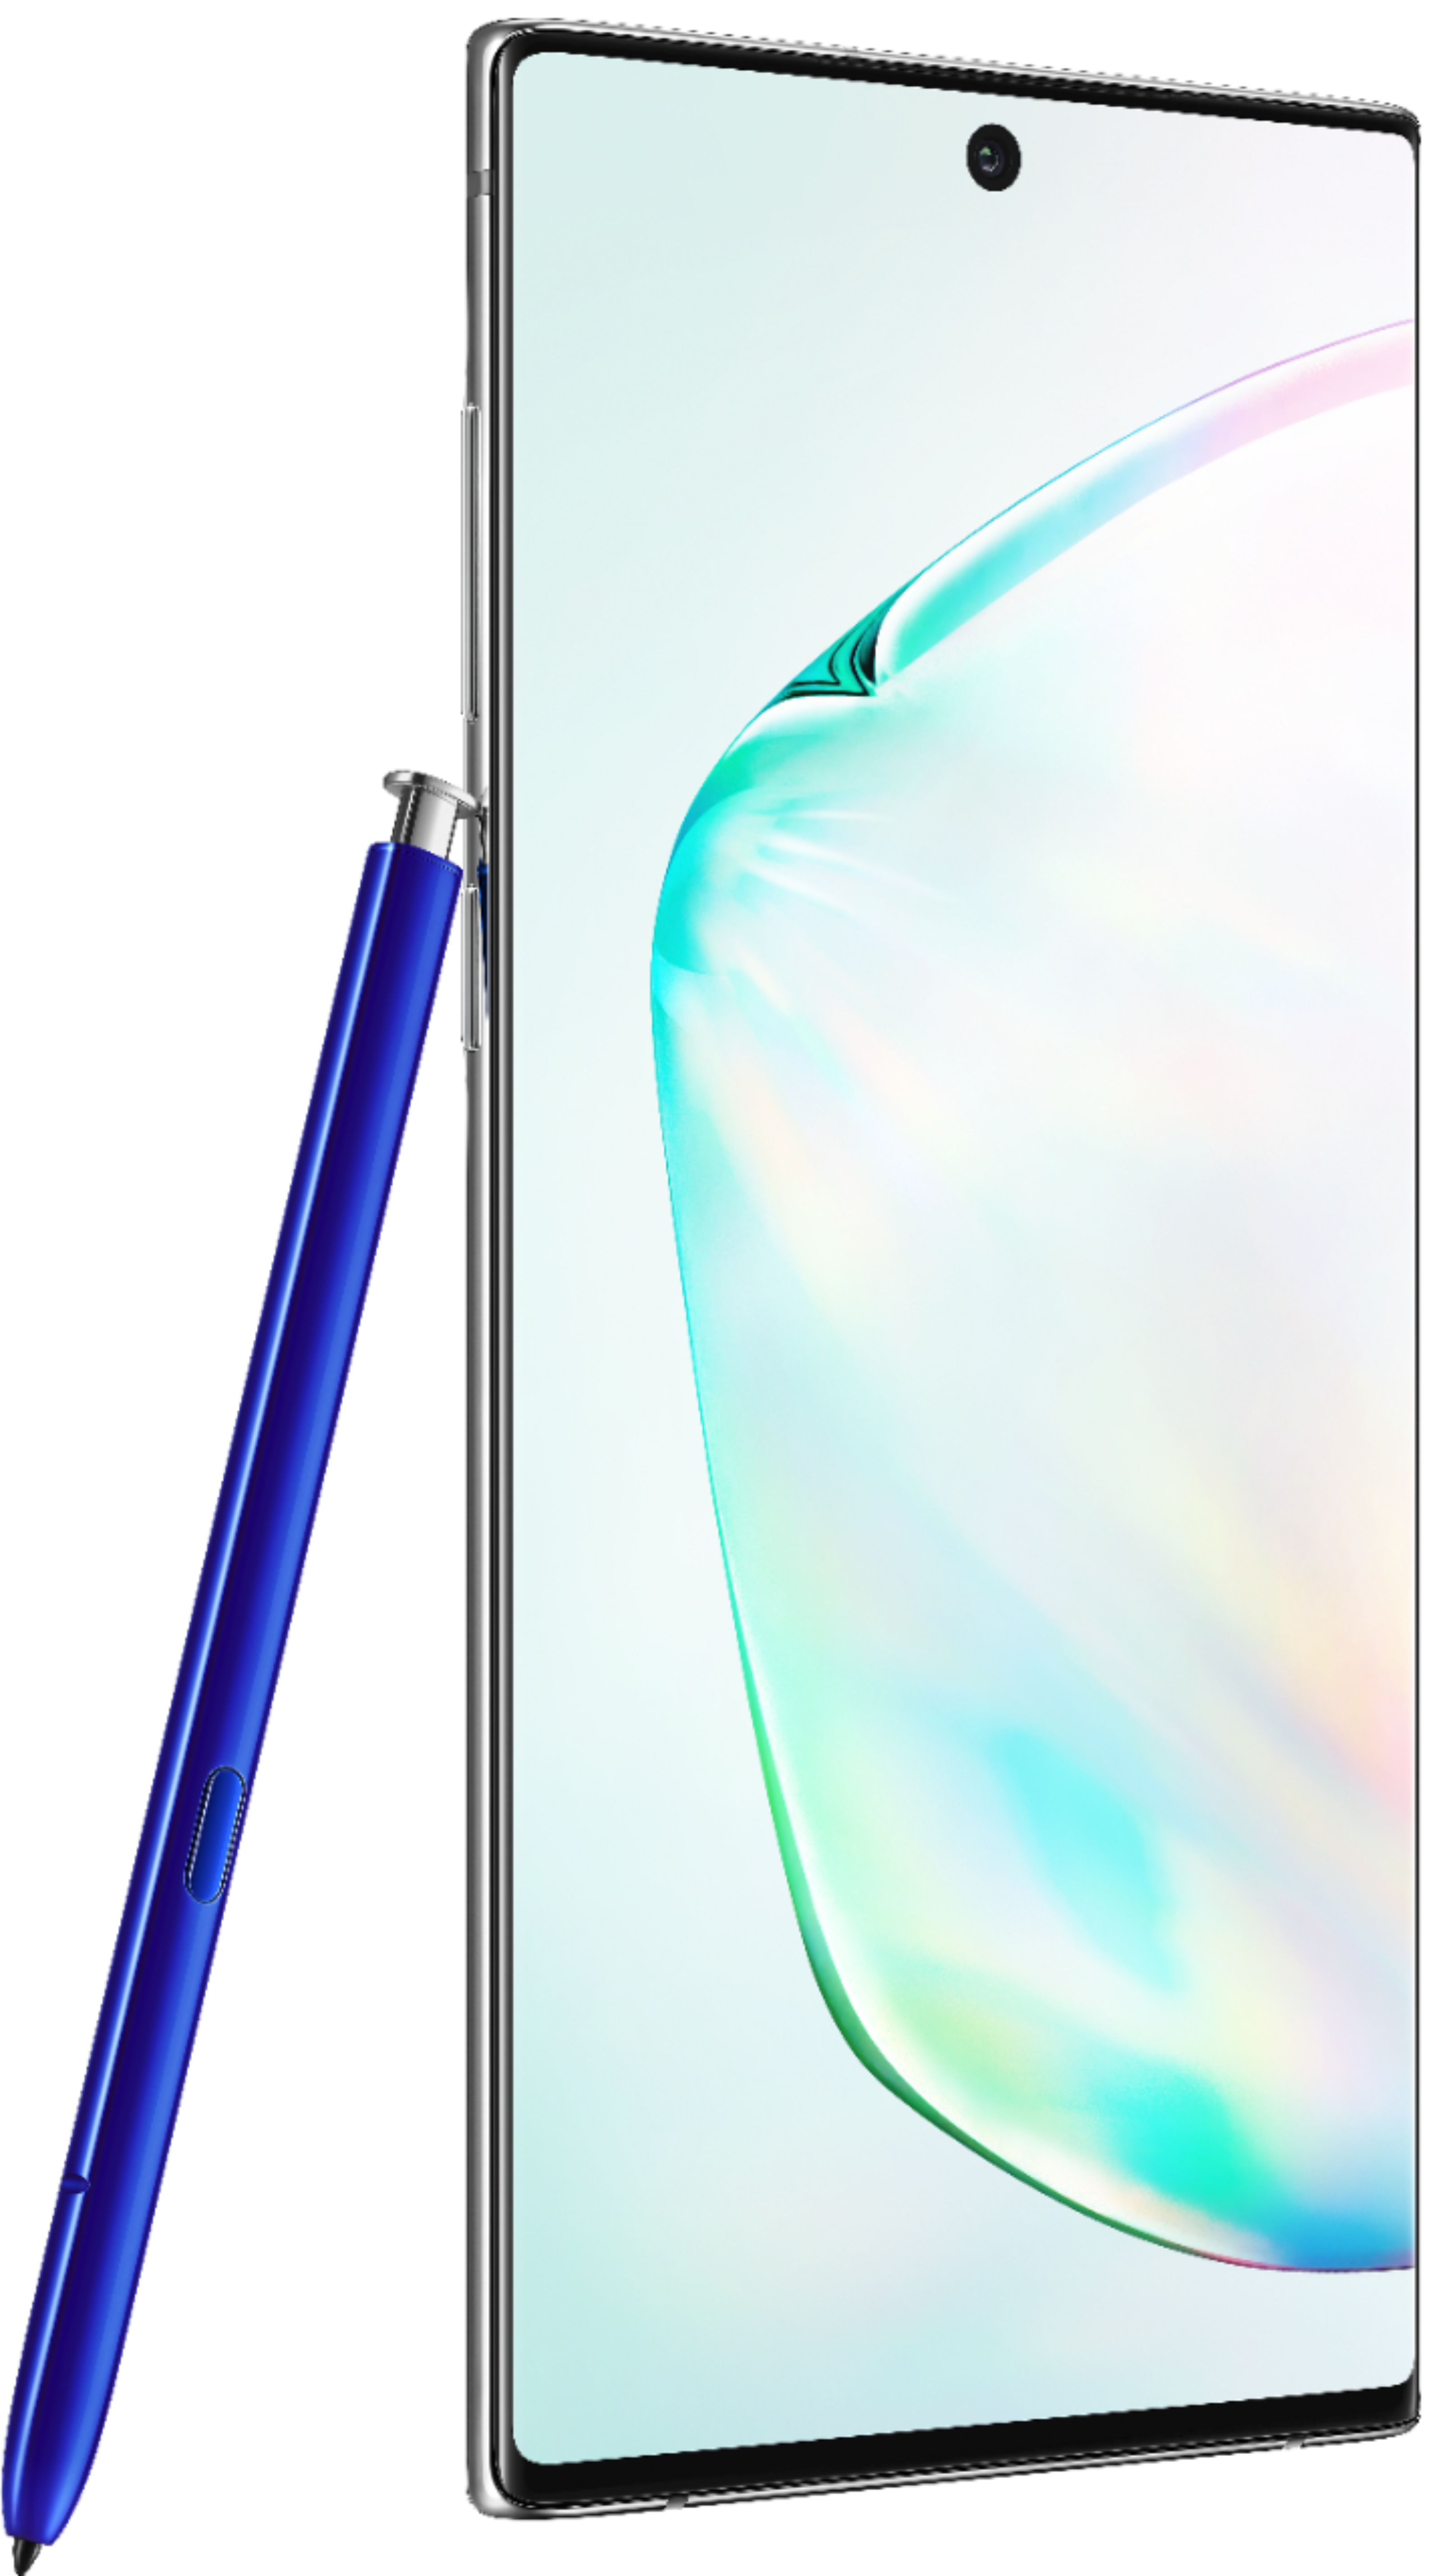 Angle View: Samsung - Geek Squad Certified Refurbished Galaxy Note10 with 256GB Memory Cell Phone (Unlocked) - Aura Glow